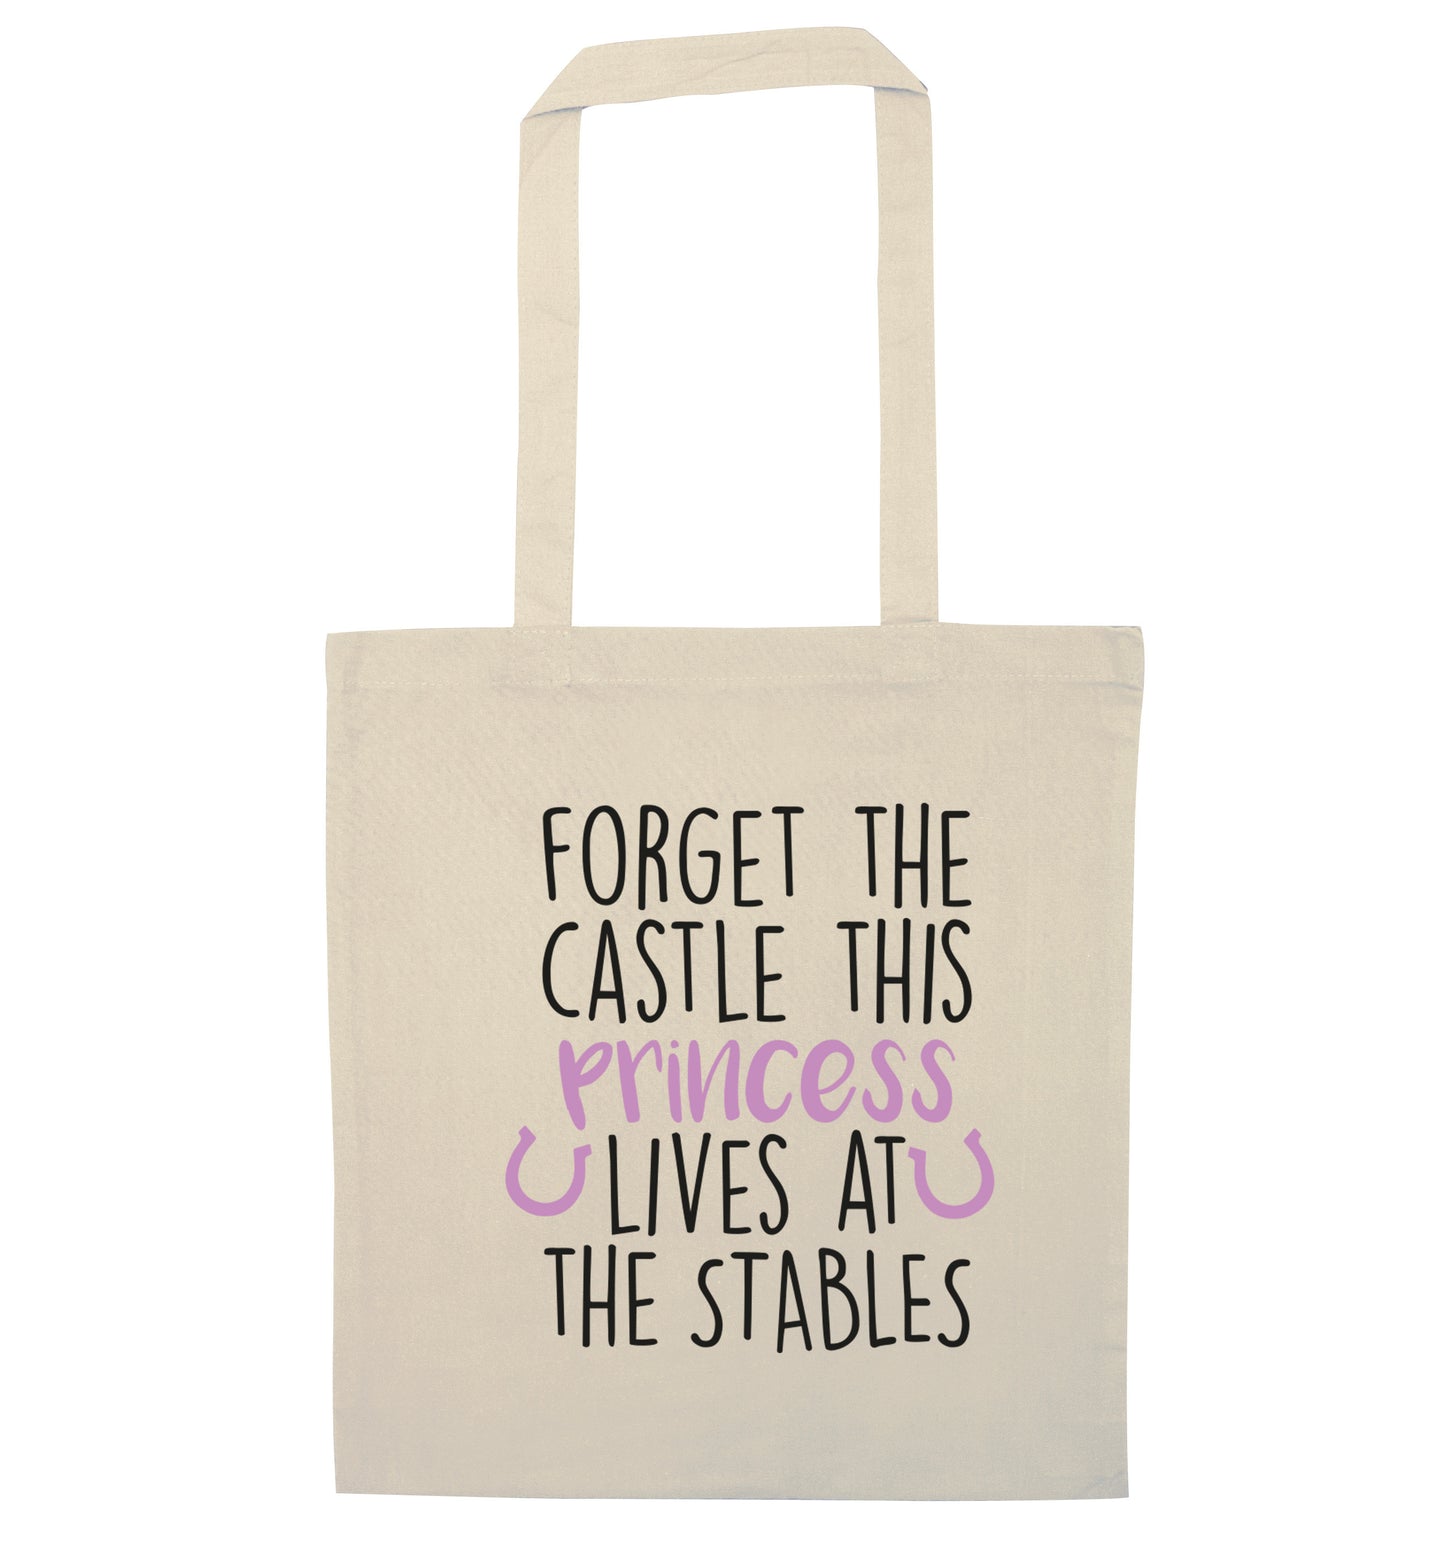 Forget the castle this princess lives at the stables natural tote bag